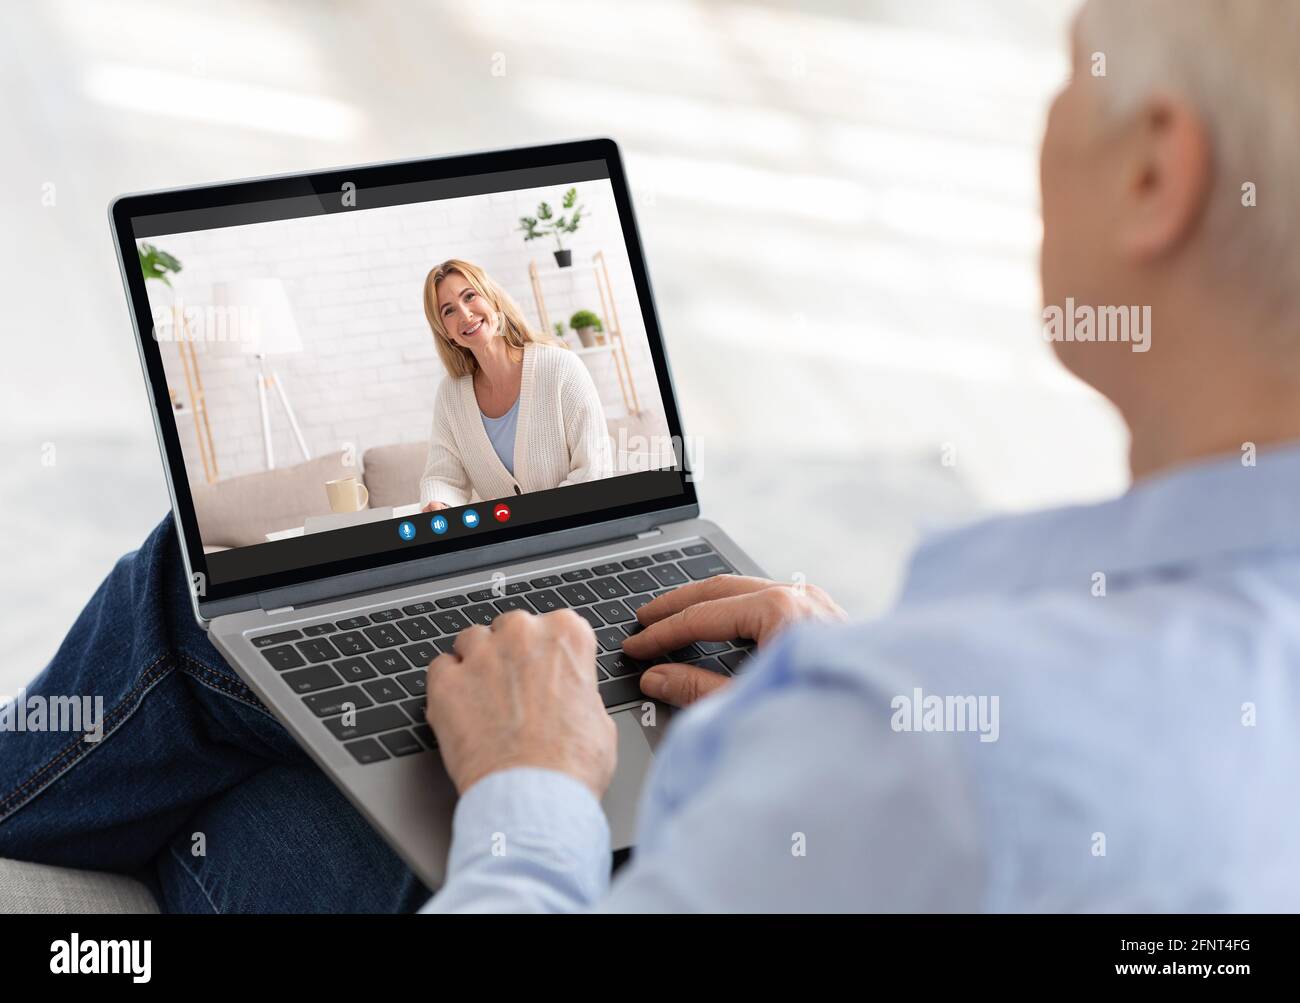 Elderly woman using laptop to communicate to her grownup daughter online, making video call with family member, indoors Stock Photo